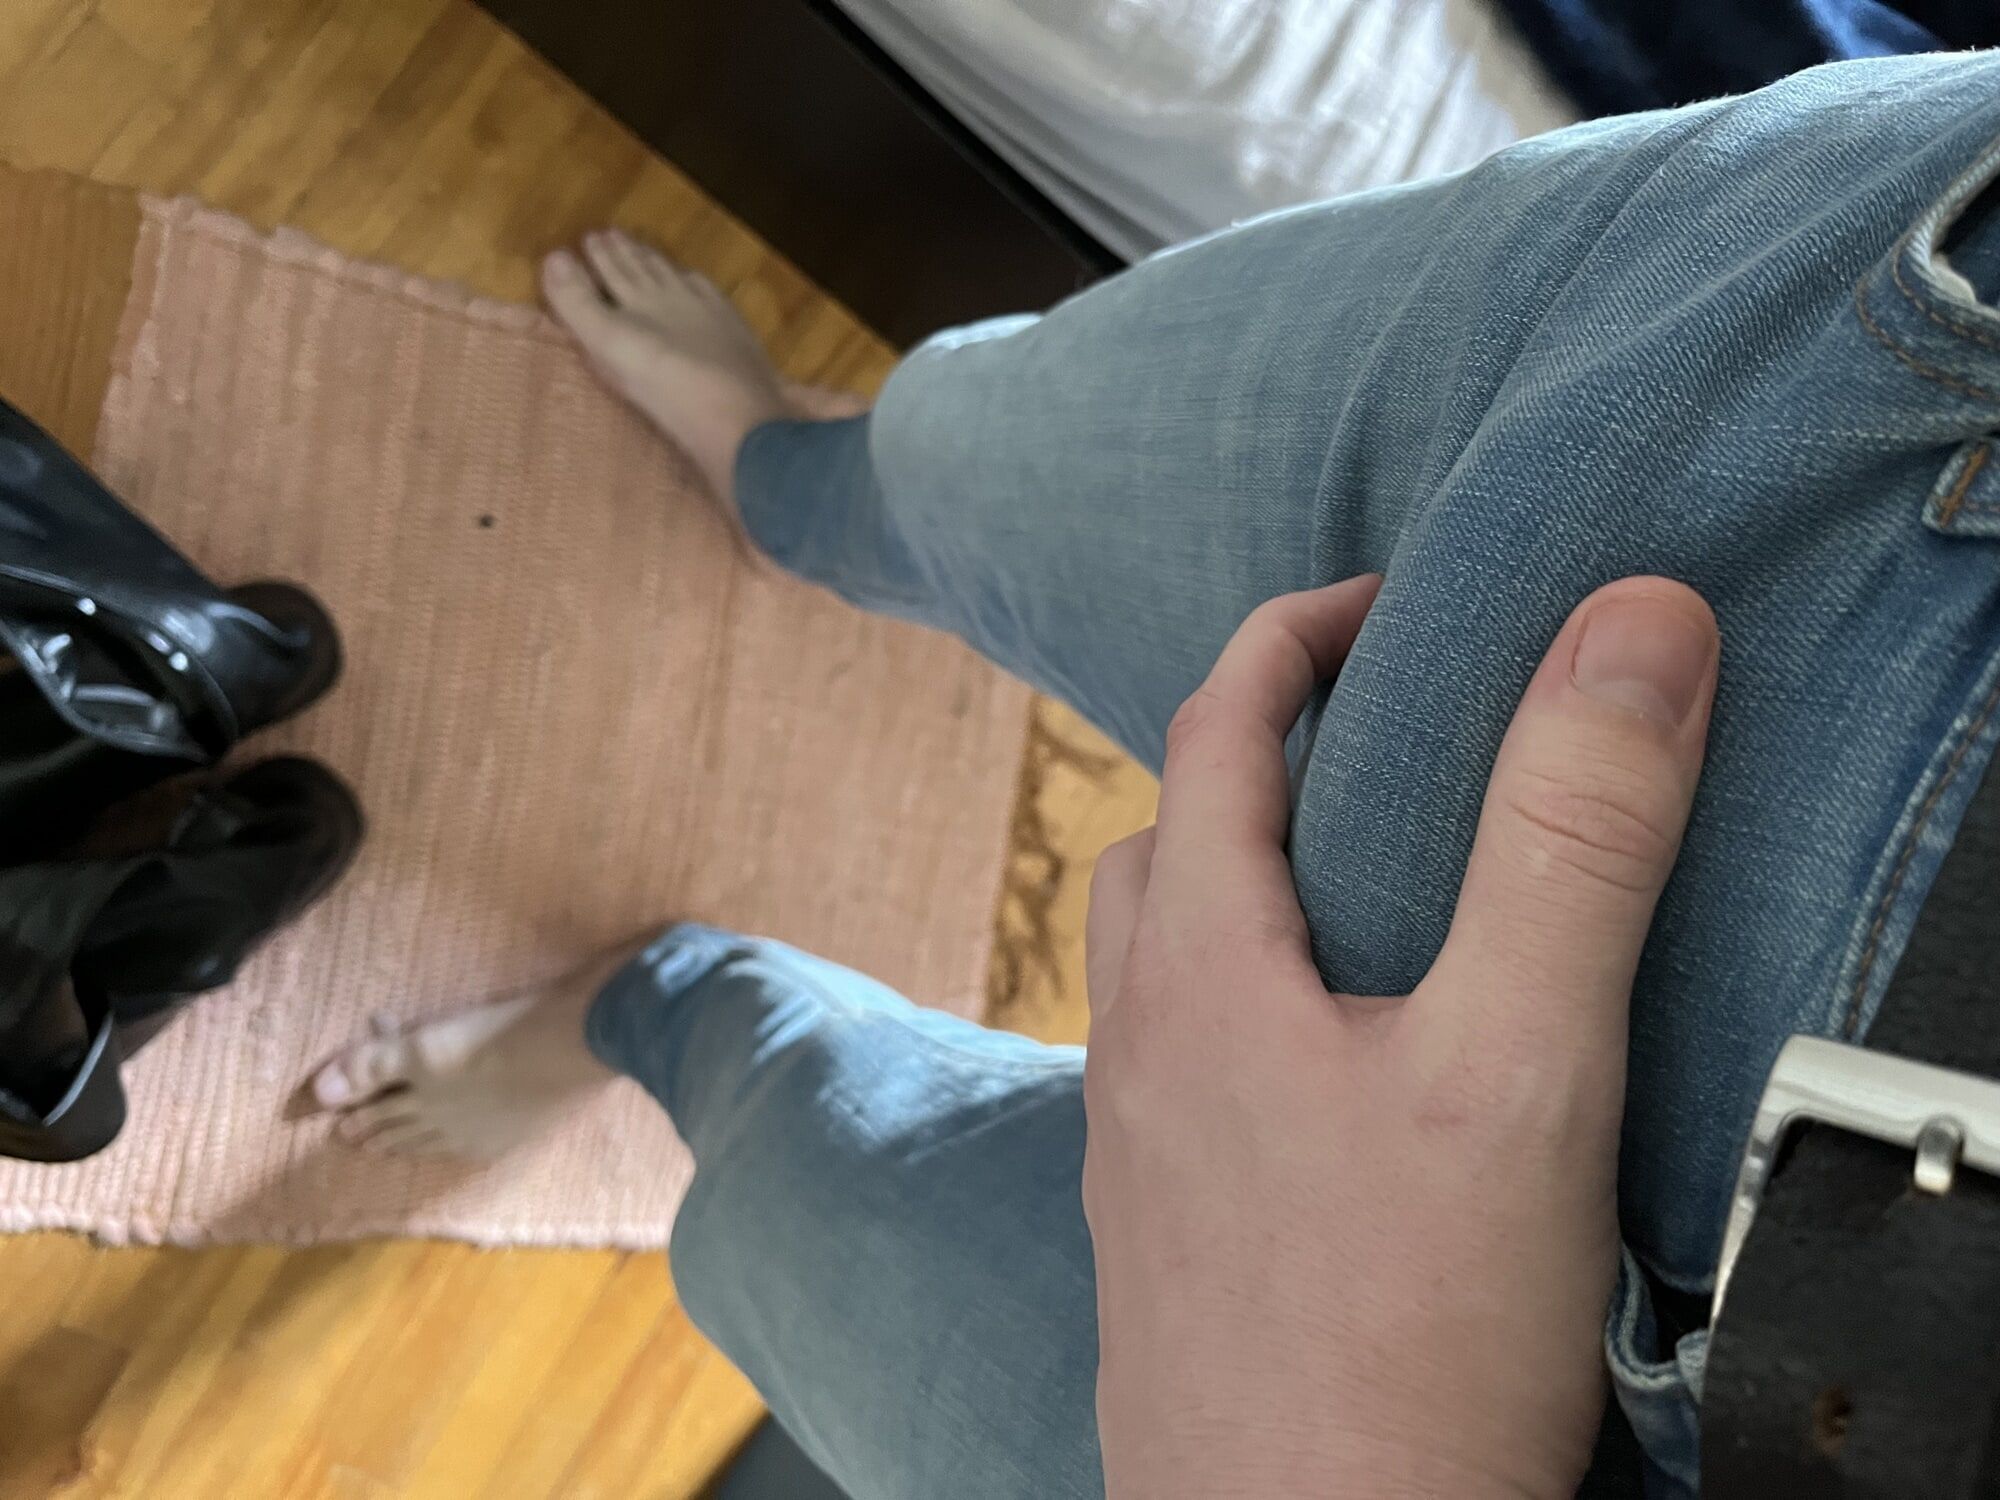 My New Tight Jeans and My Big Hard Ccock for You #2